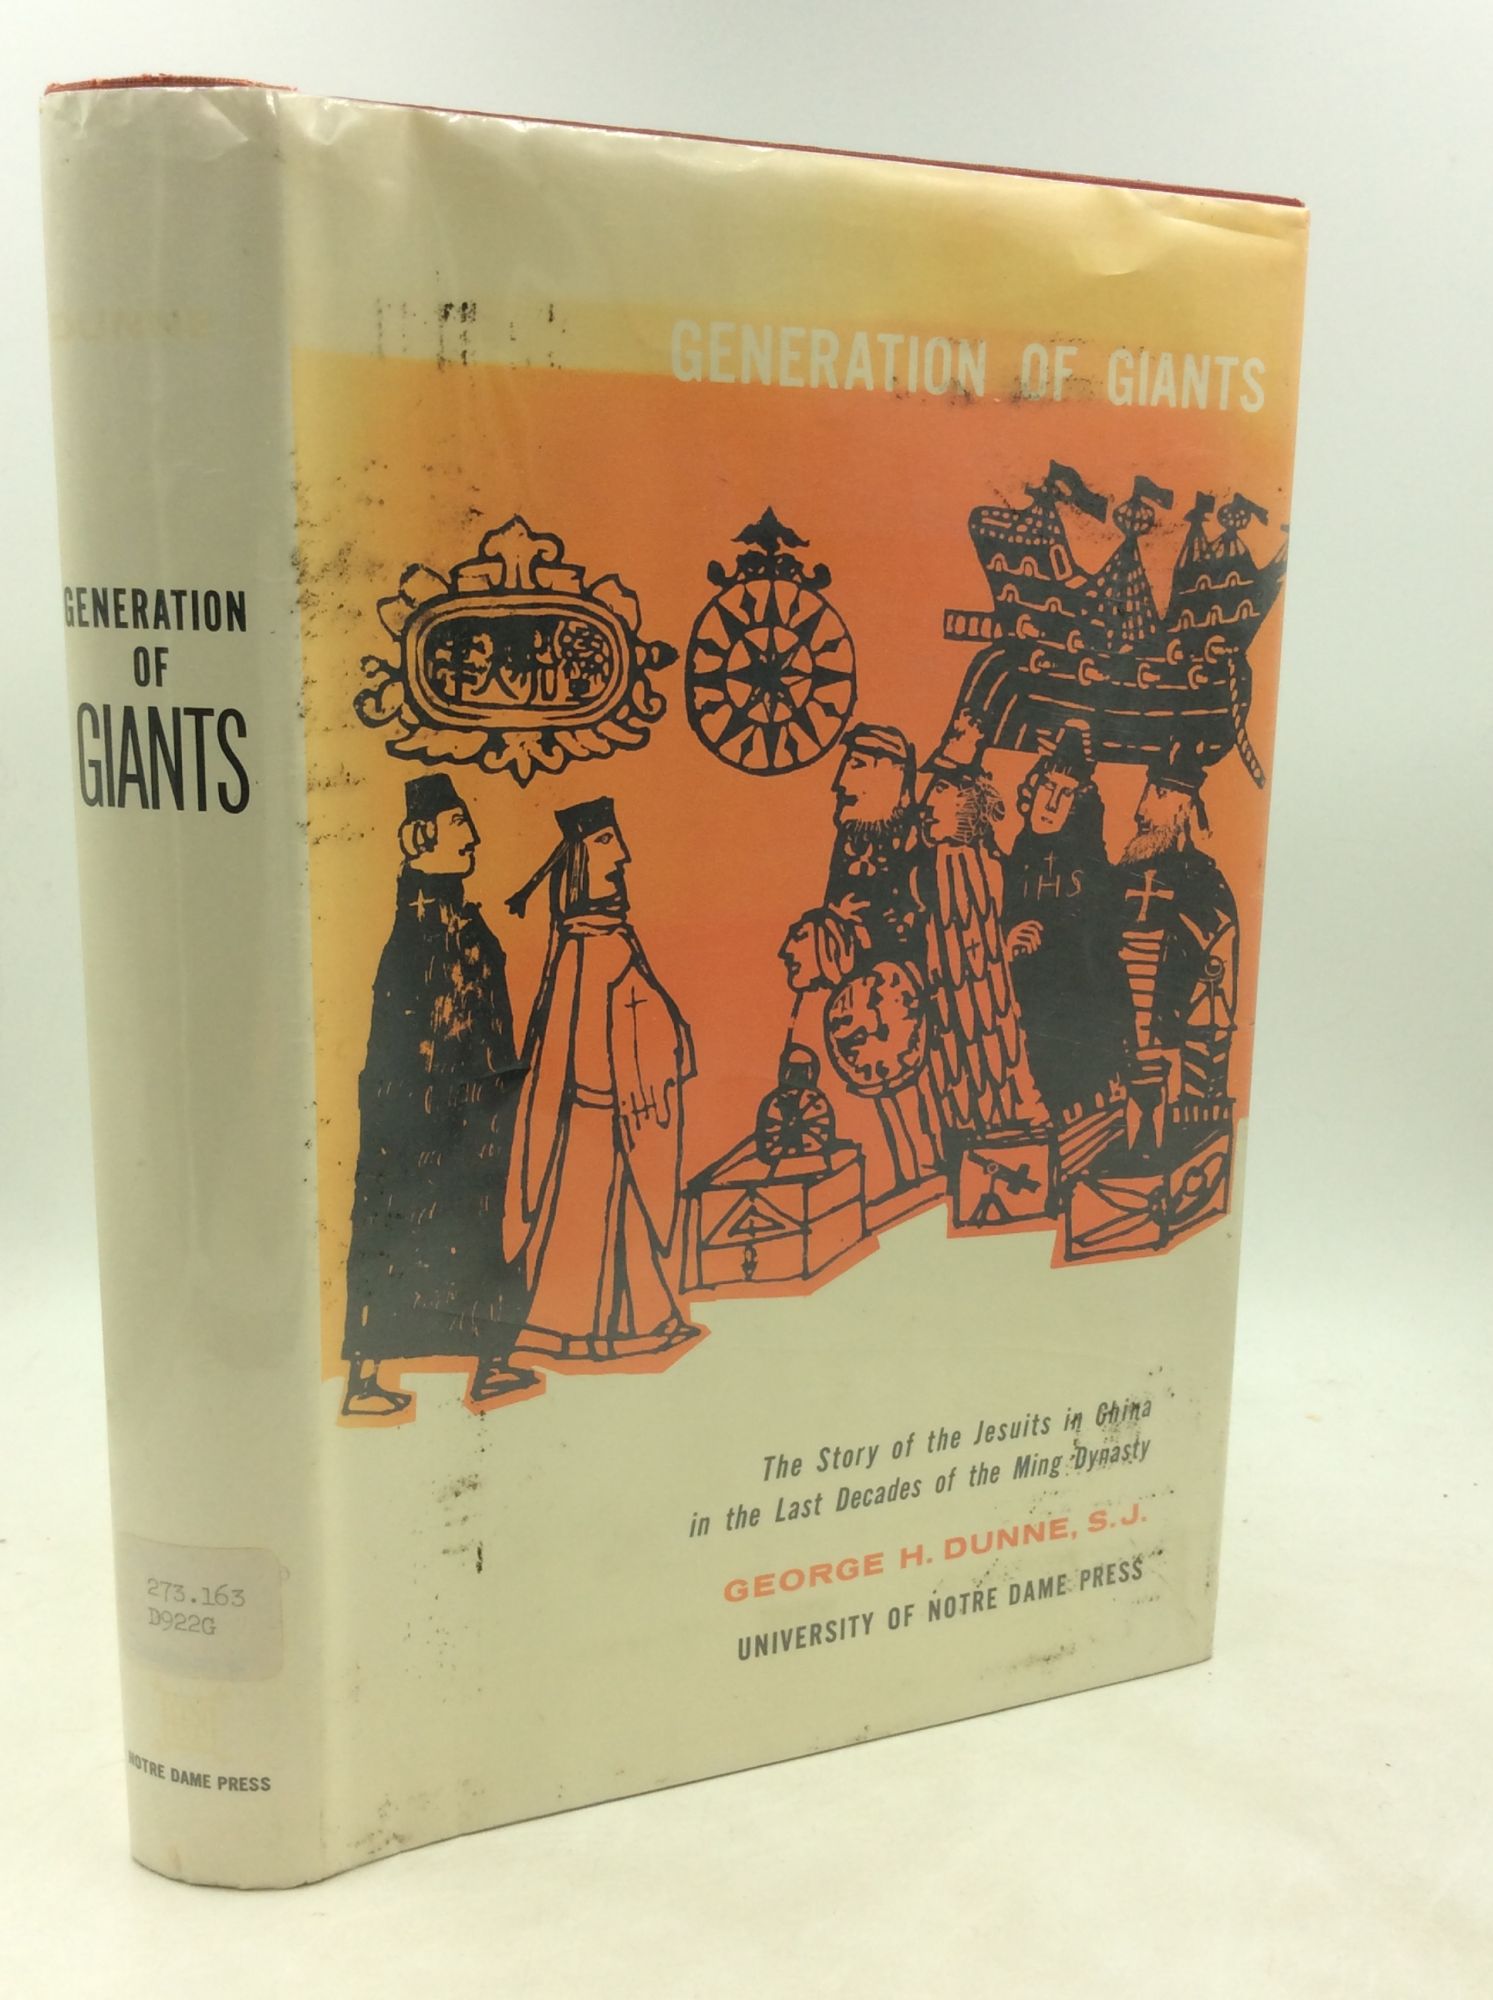 Generation of Giants; the Story of the Jesuits in China in the Last Decades  of the Ming Dynasty